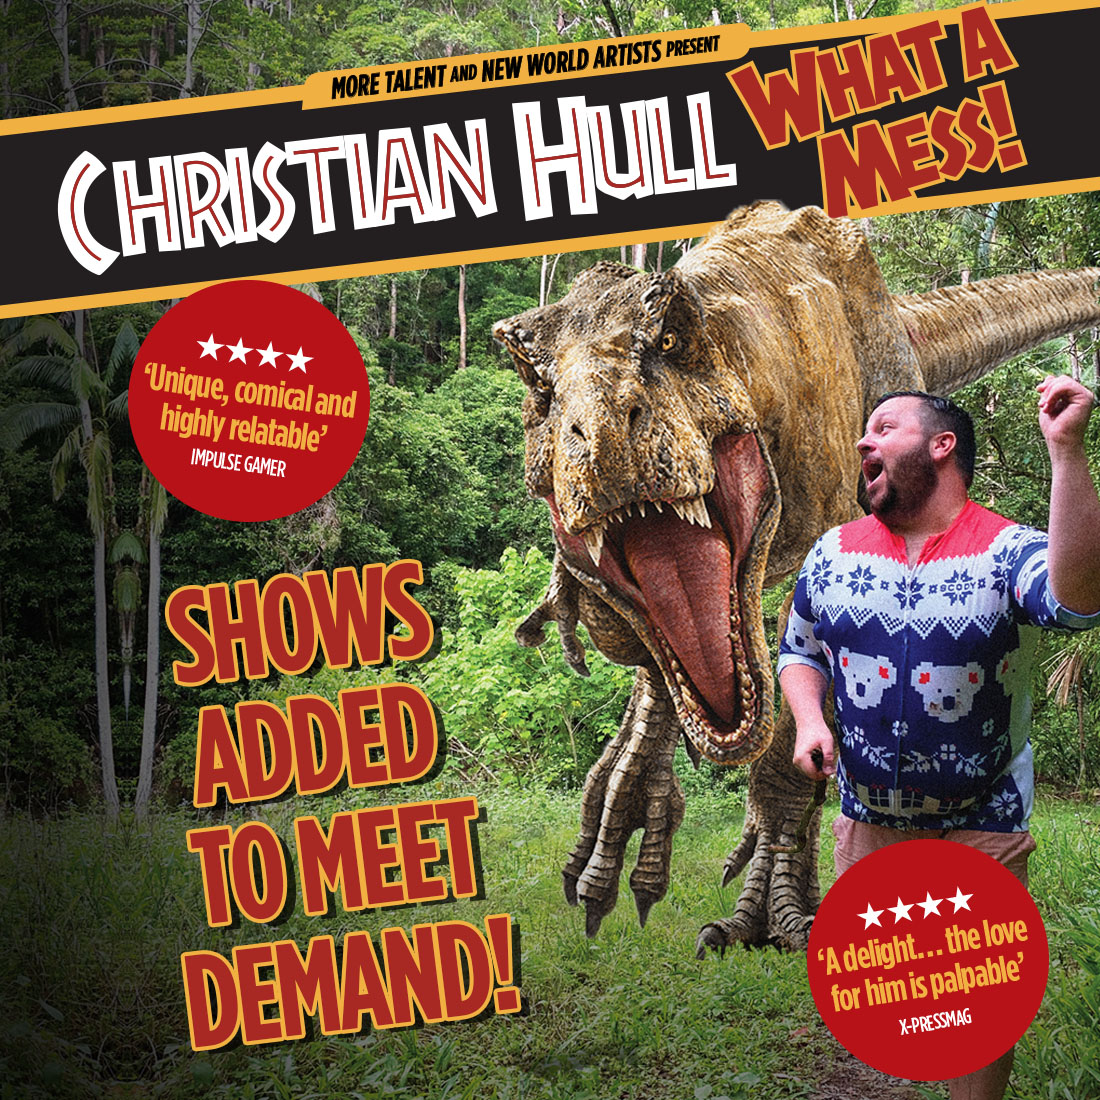 Christian Hull, wearing a novelty knitted Koala and Snowflakes jumper and brown shorts, is running looking back over his left shoulder where he is being chased by a giant T-Rex dinosaur! This image is definitely unaltered and depicts a real life occurence. Across the poster is written "CHRISTIAN HULL: WHAT A MESS!"